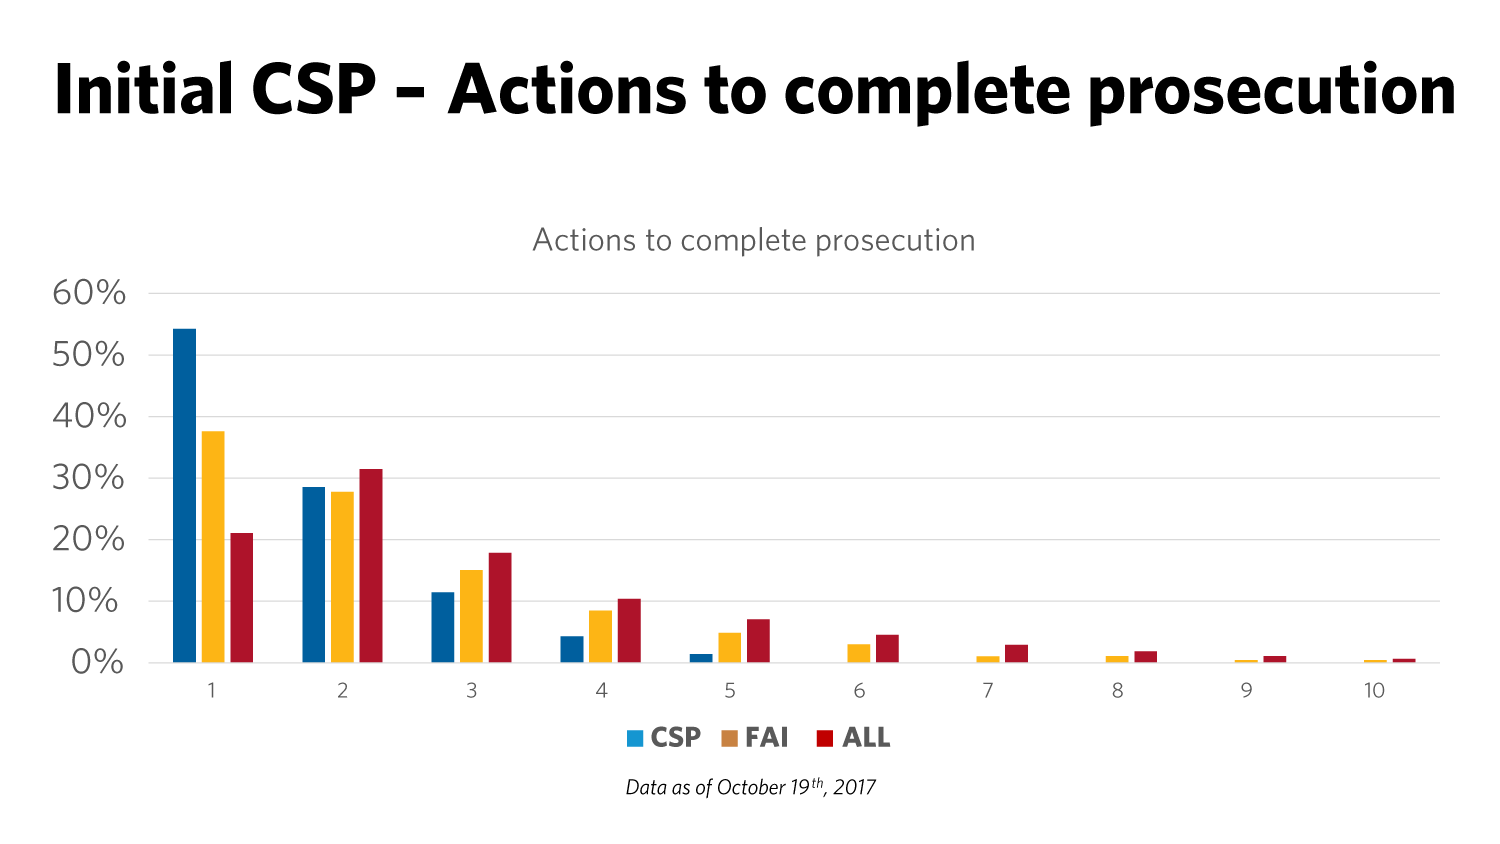 Bar chart showing the number of examiner actions necessary to complete prosecution for the initial CSP, FAI, and all applications. Well over 50% of the initial CSP applications completed prosecution in a single action. This is true for less than 40% of FAI applications and just over 20% of all applications. Data as of October 19, 2017.